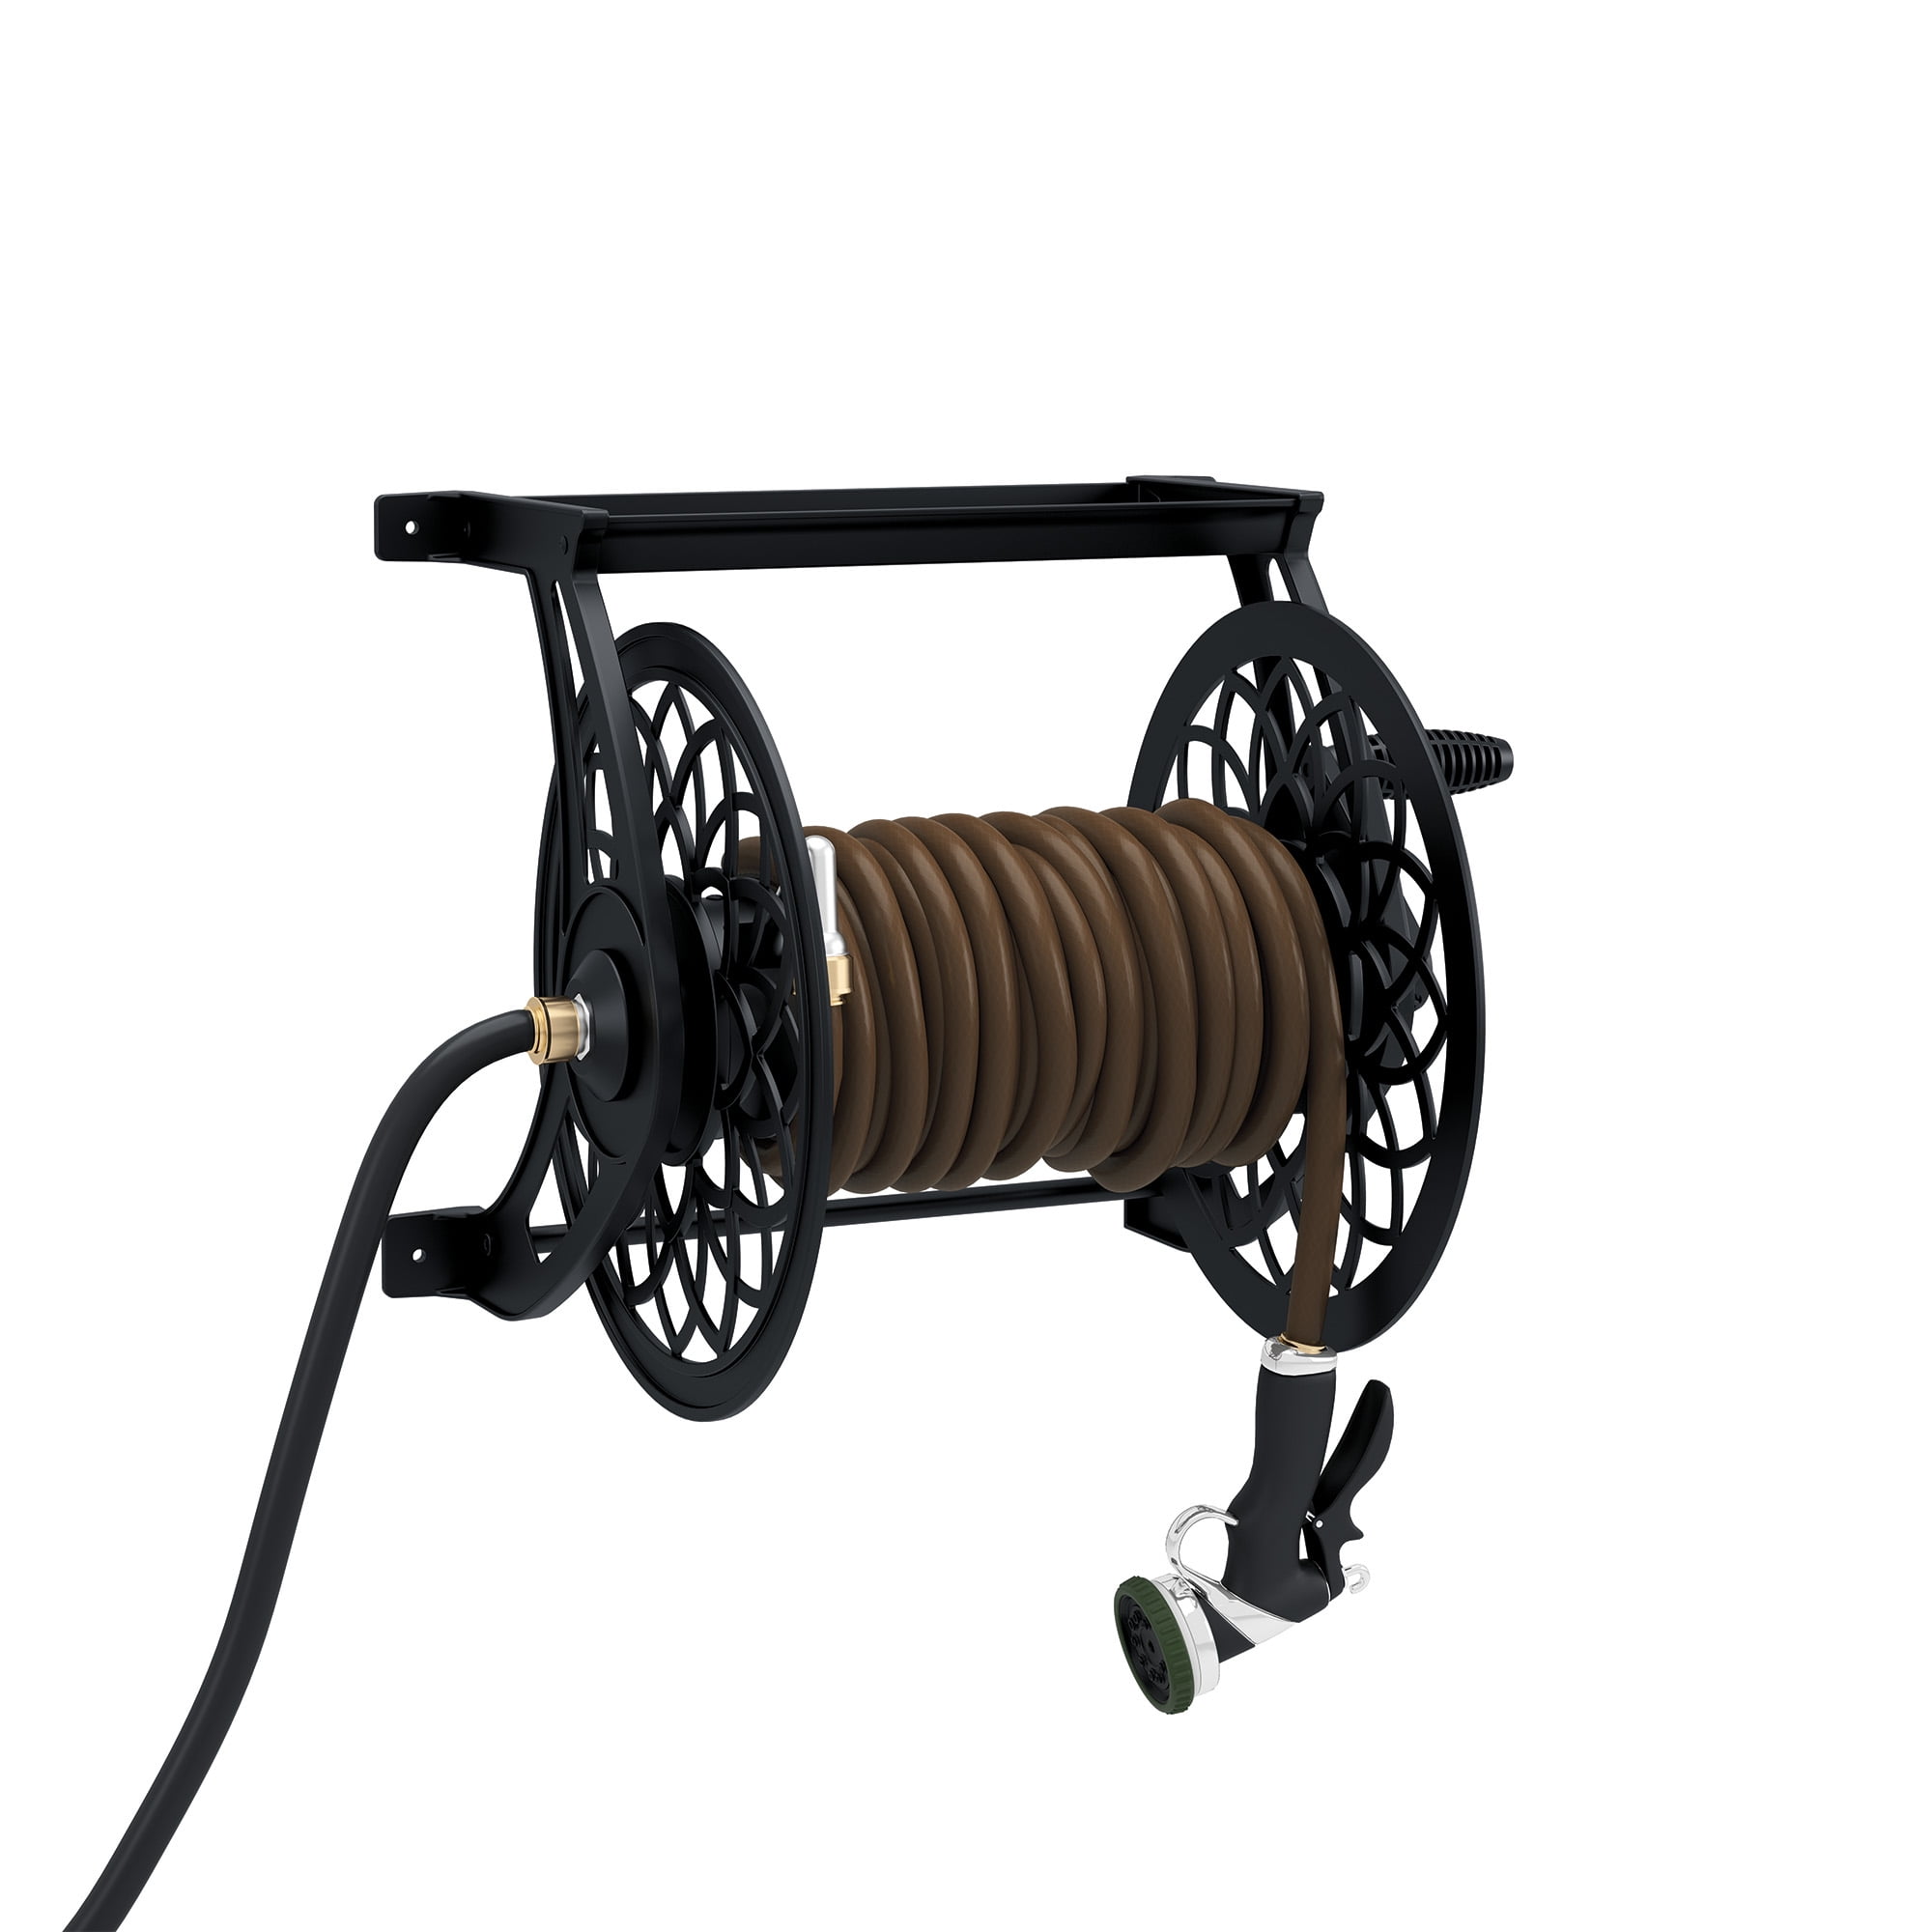 Wall Mount Hose Holder Wall Mount Hose Reel Includes a Compartment for Storing Hose Attachments Wall Mounted Garden Hose Storage Caddy 